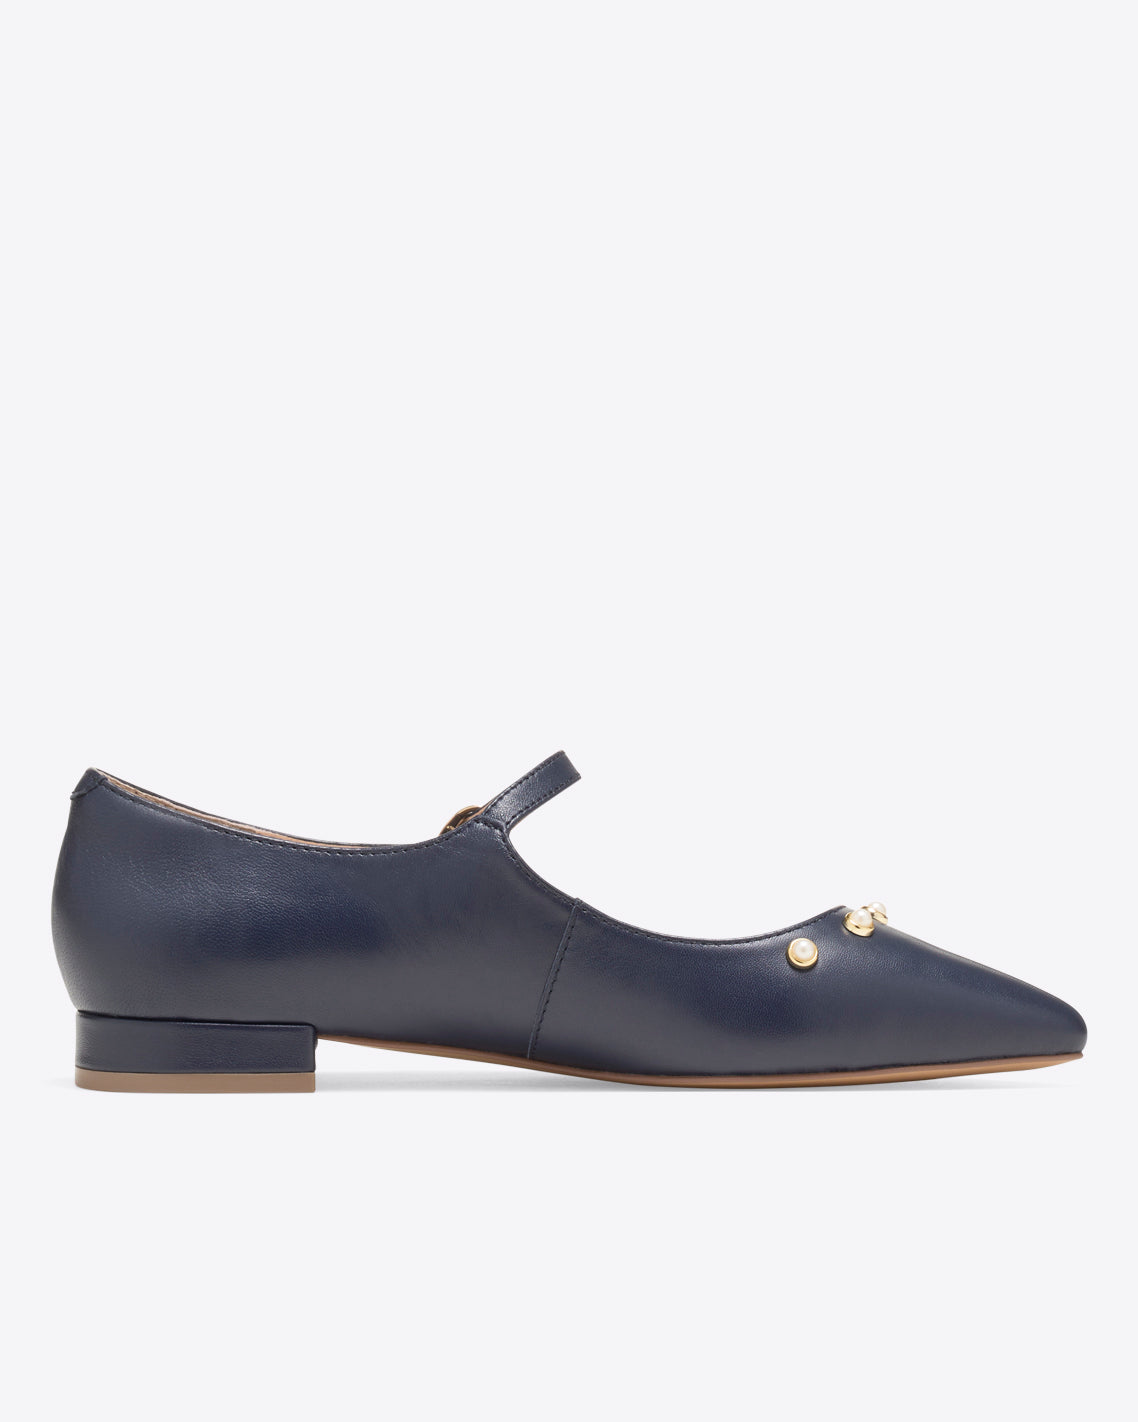 Adeline Mary Jane Flats in Navy Leather